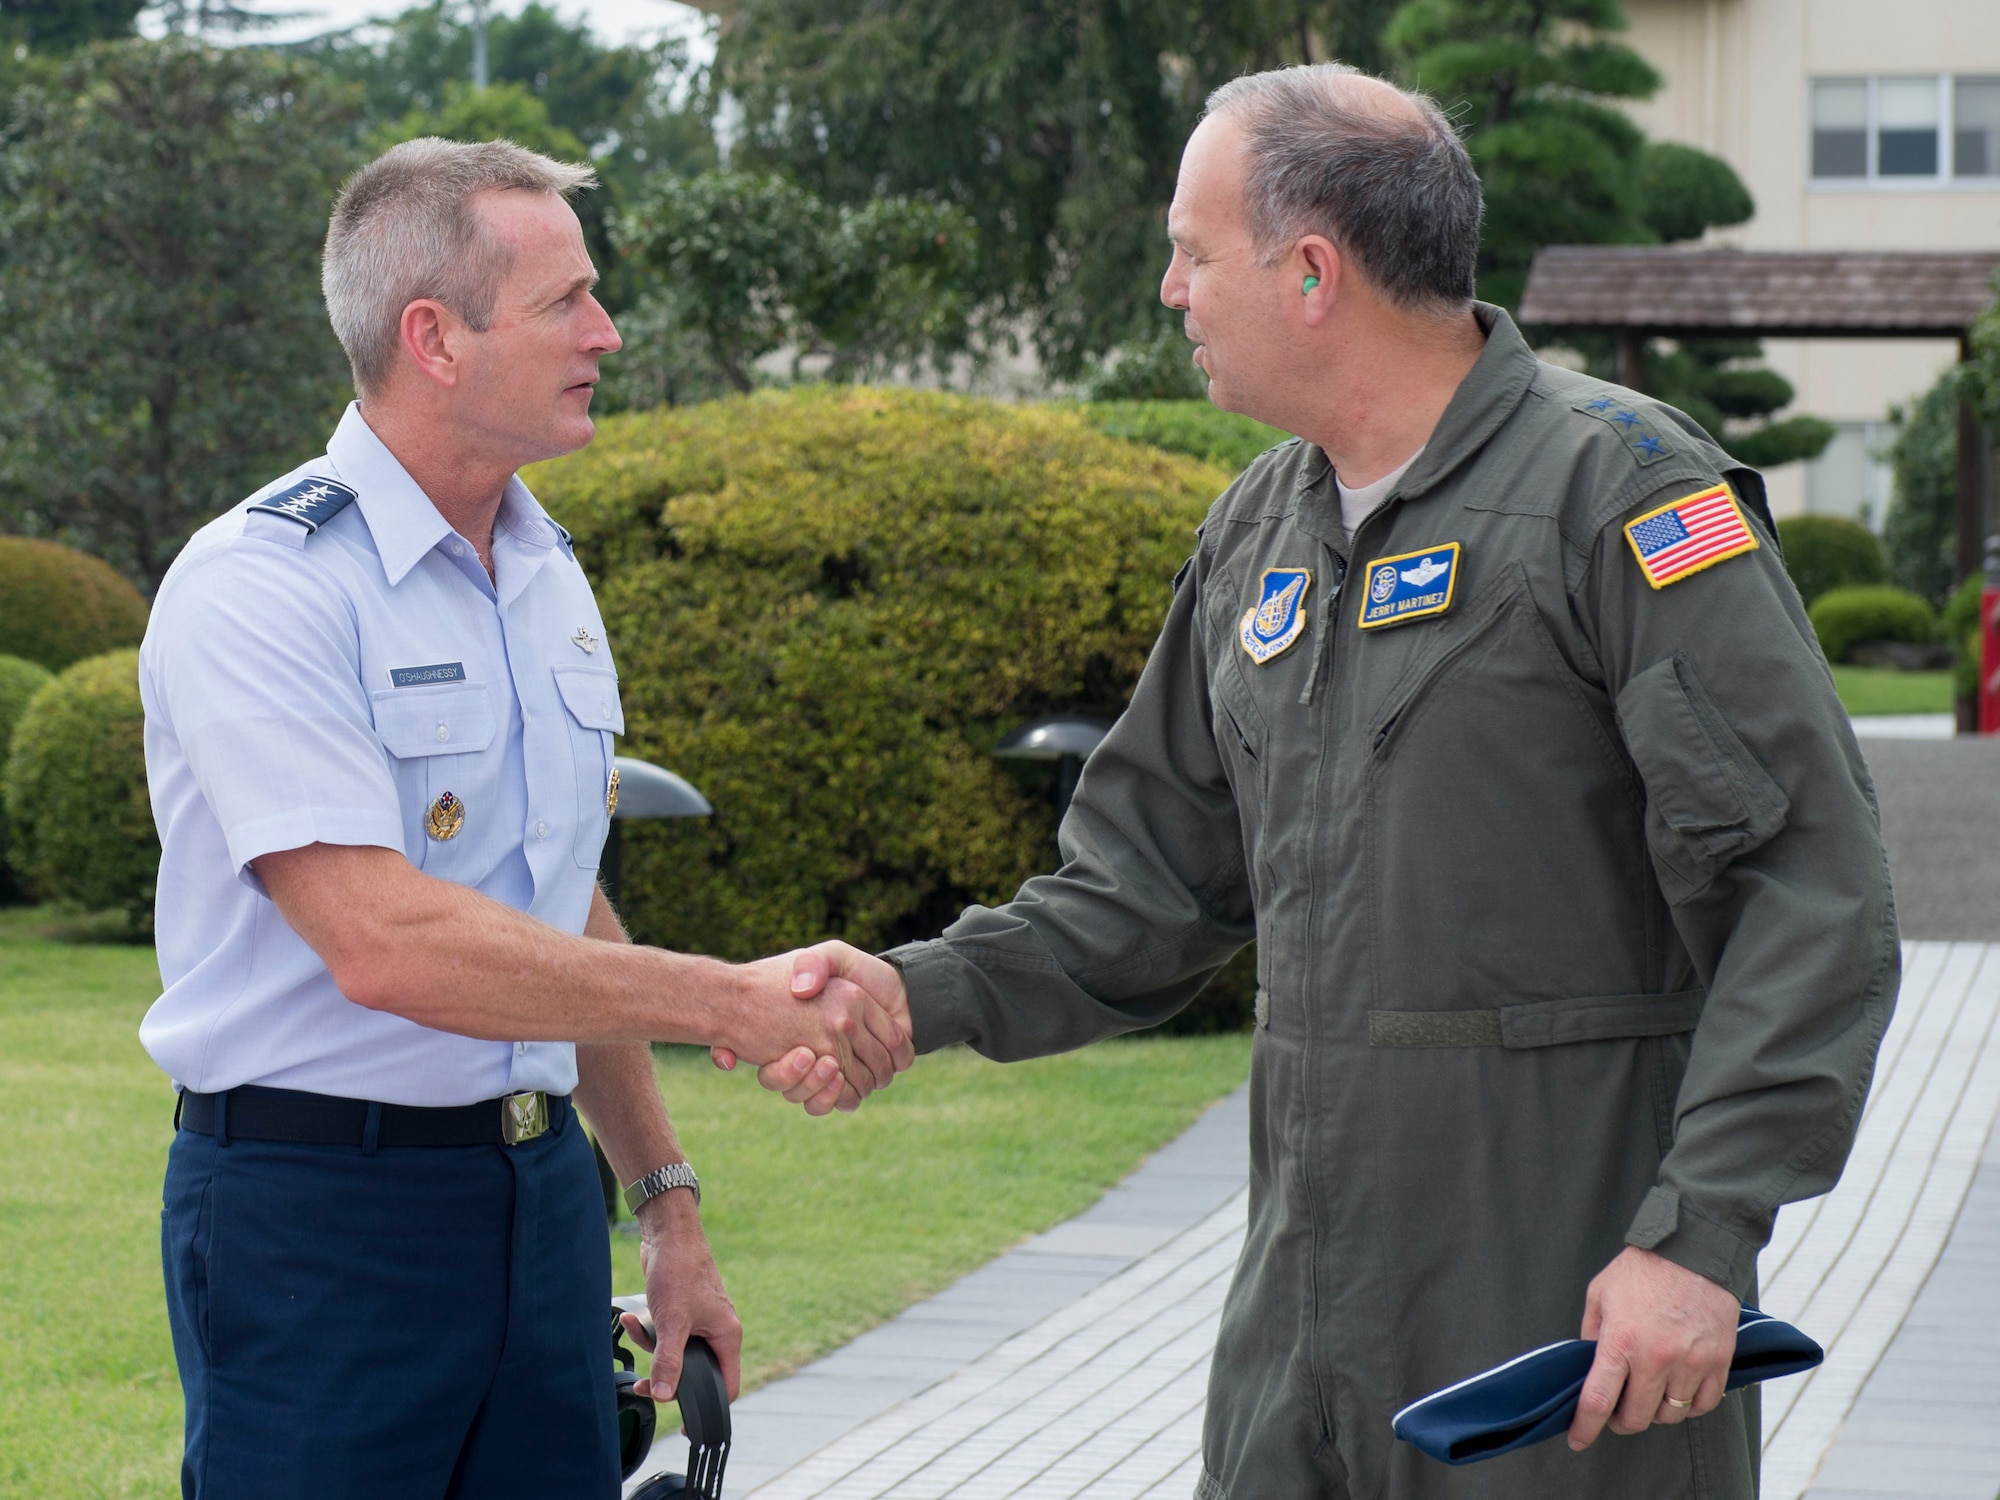 U.S. Air Force Gen. Terrence J. O’Shaughnessy, Pacific Air Forces commander, shakes hands with Lt. Gen. Jerry P. Martinez, U.S. Forces Japan and 5th Air Force commander, Aug. 30, 2017, at Yokota Air Base, Japan. O’Shaughnessy’s visit was to reaffirm the strength of the partnership between the U.S. Air Force and the Japan Air Self-Defense Force. (U.S. Air Force photo by Airman 1st Class Kevin West)